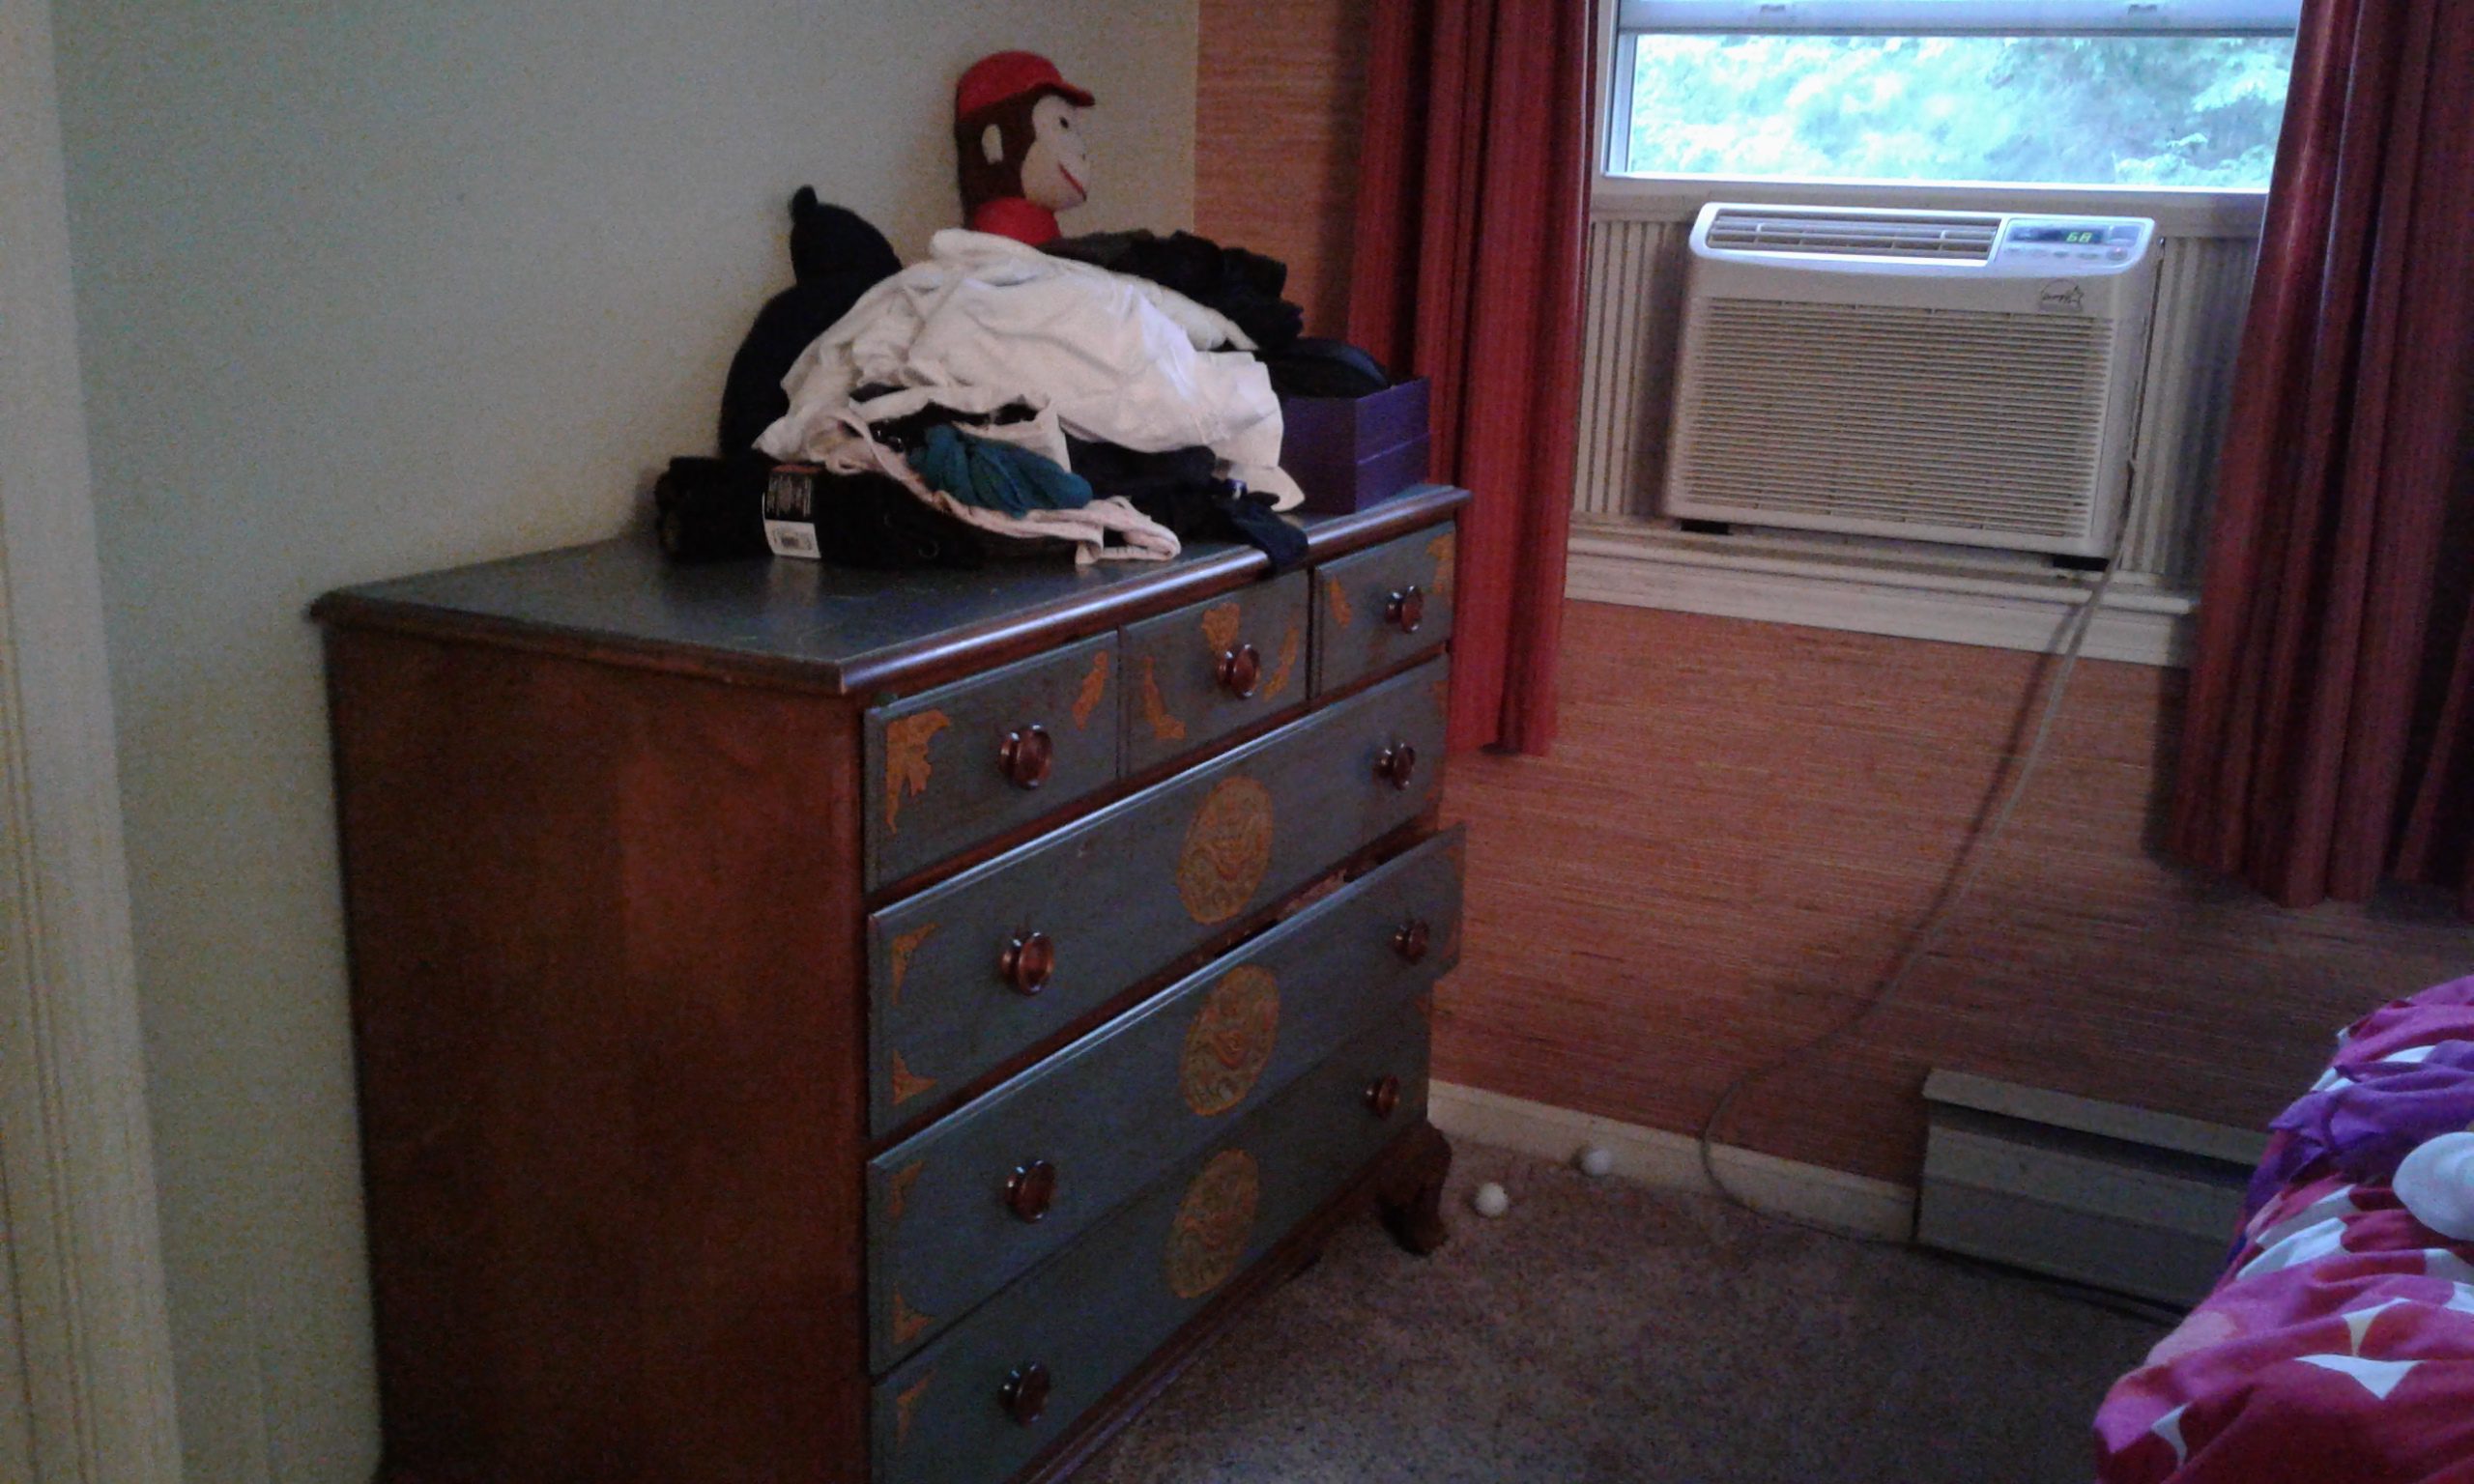 The dresser before we cleared its clutter